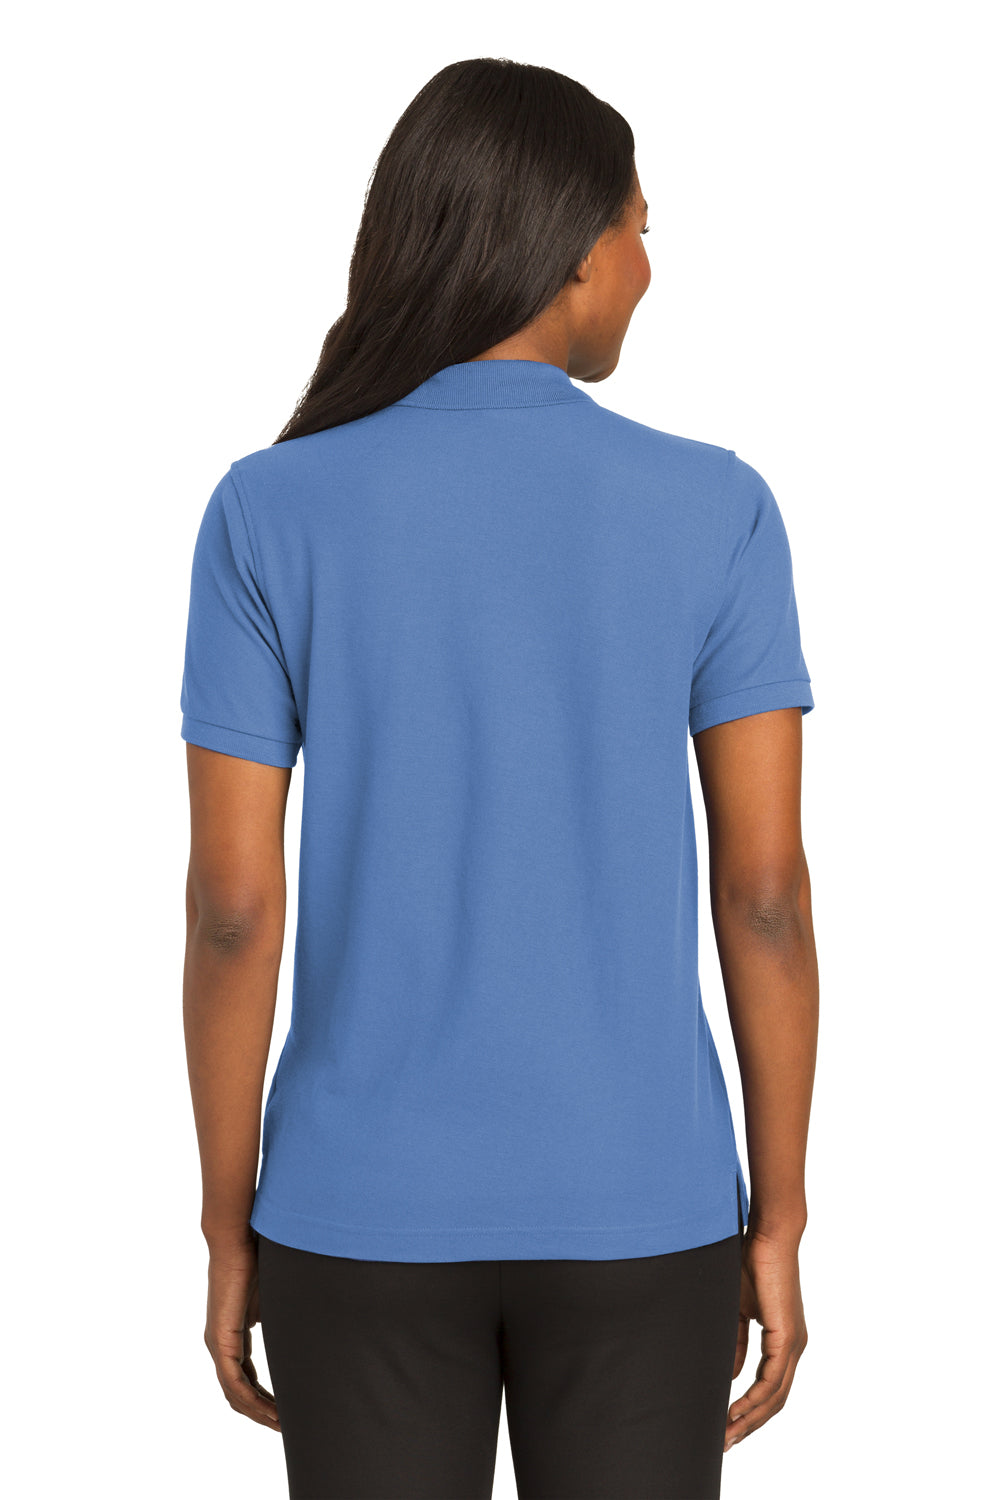 Port Authority L500 Womens Silk Touch Wrinkle Resistant Short Sleeve Polo Shirt Ultramarine Blue Back